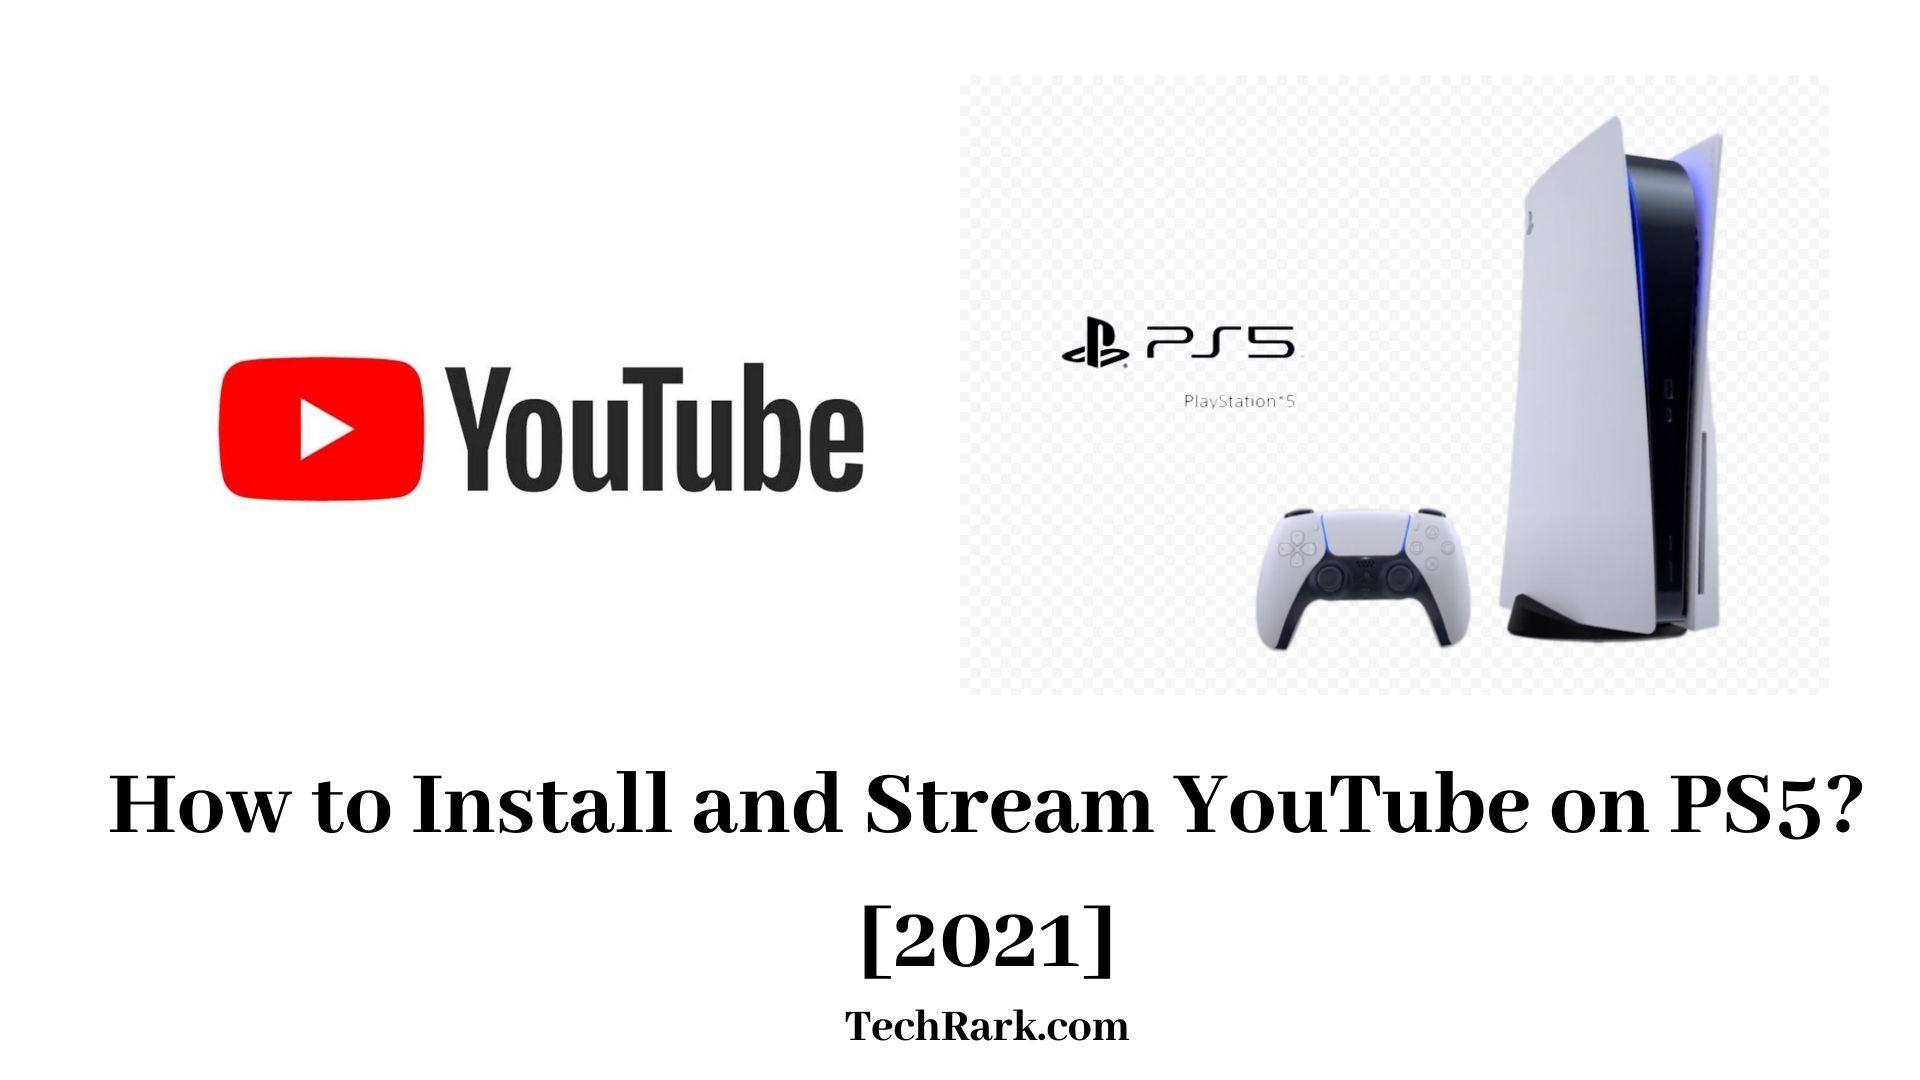 YouTube on PS5